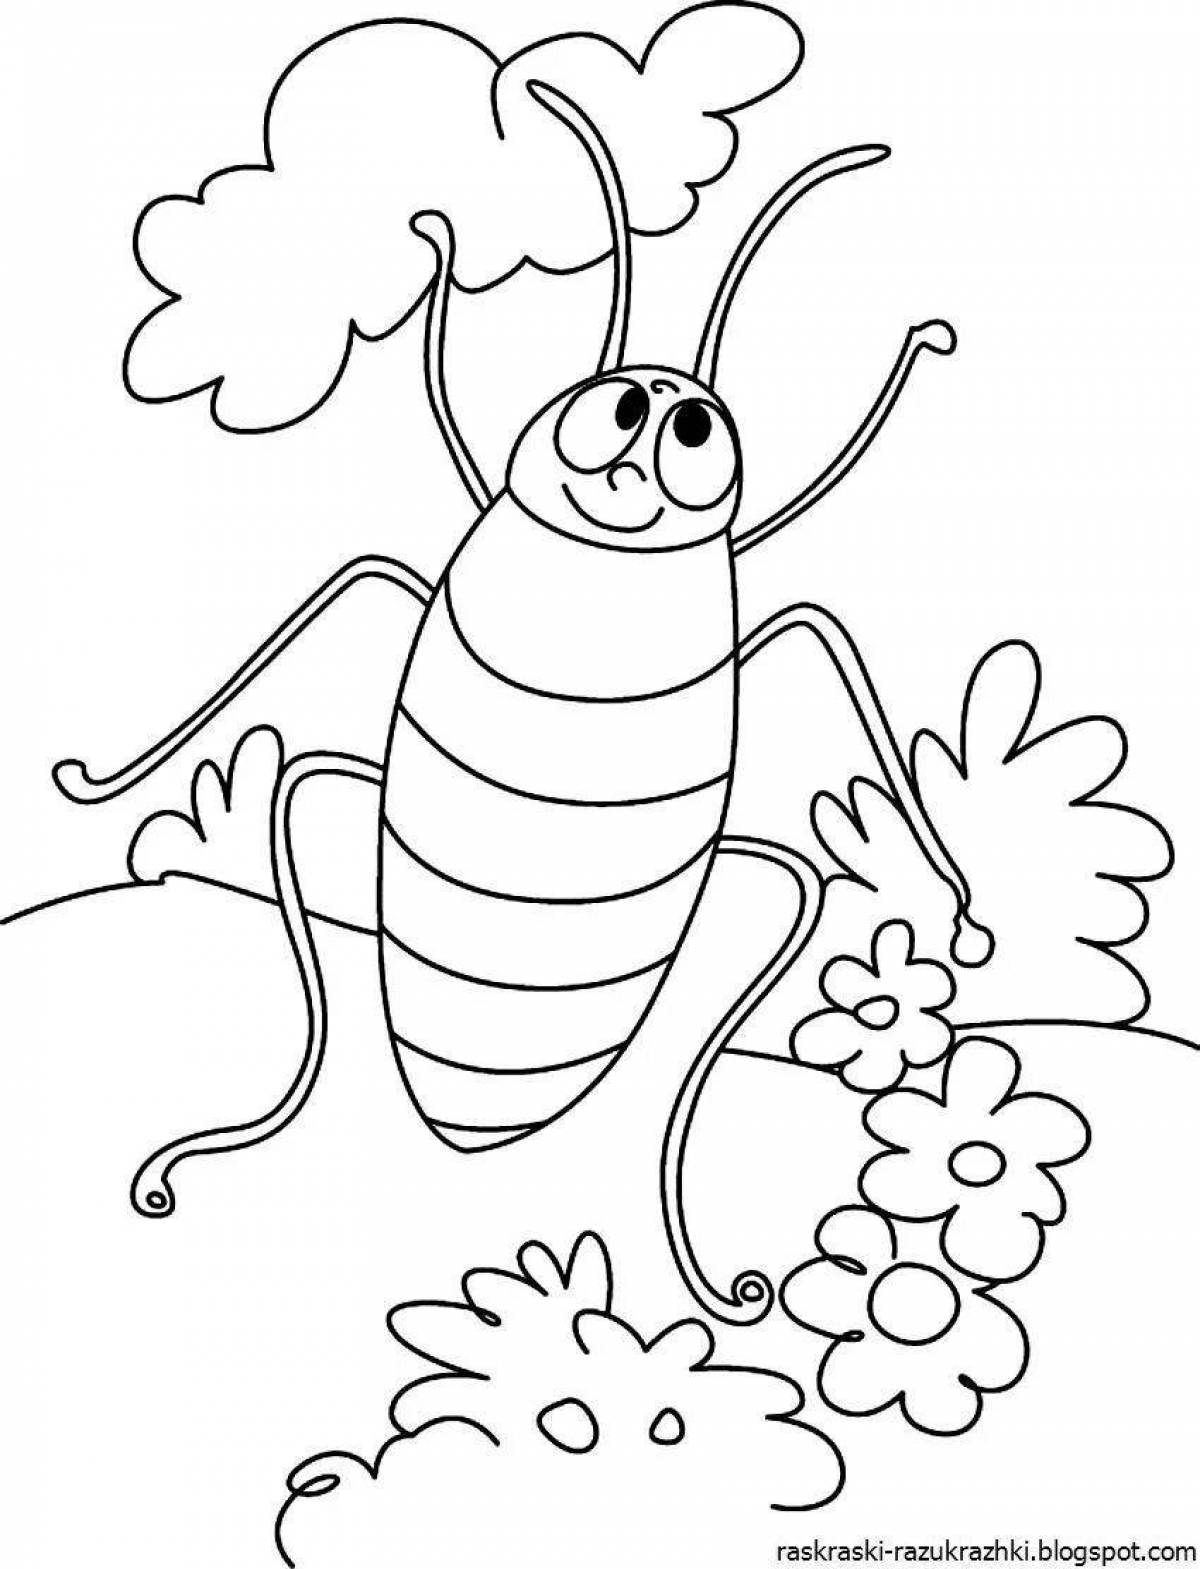 Colorful cockroach coloring page for kids